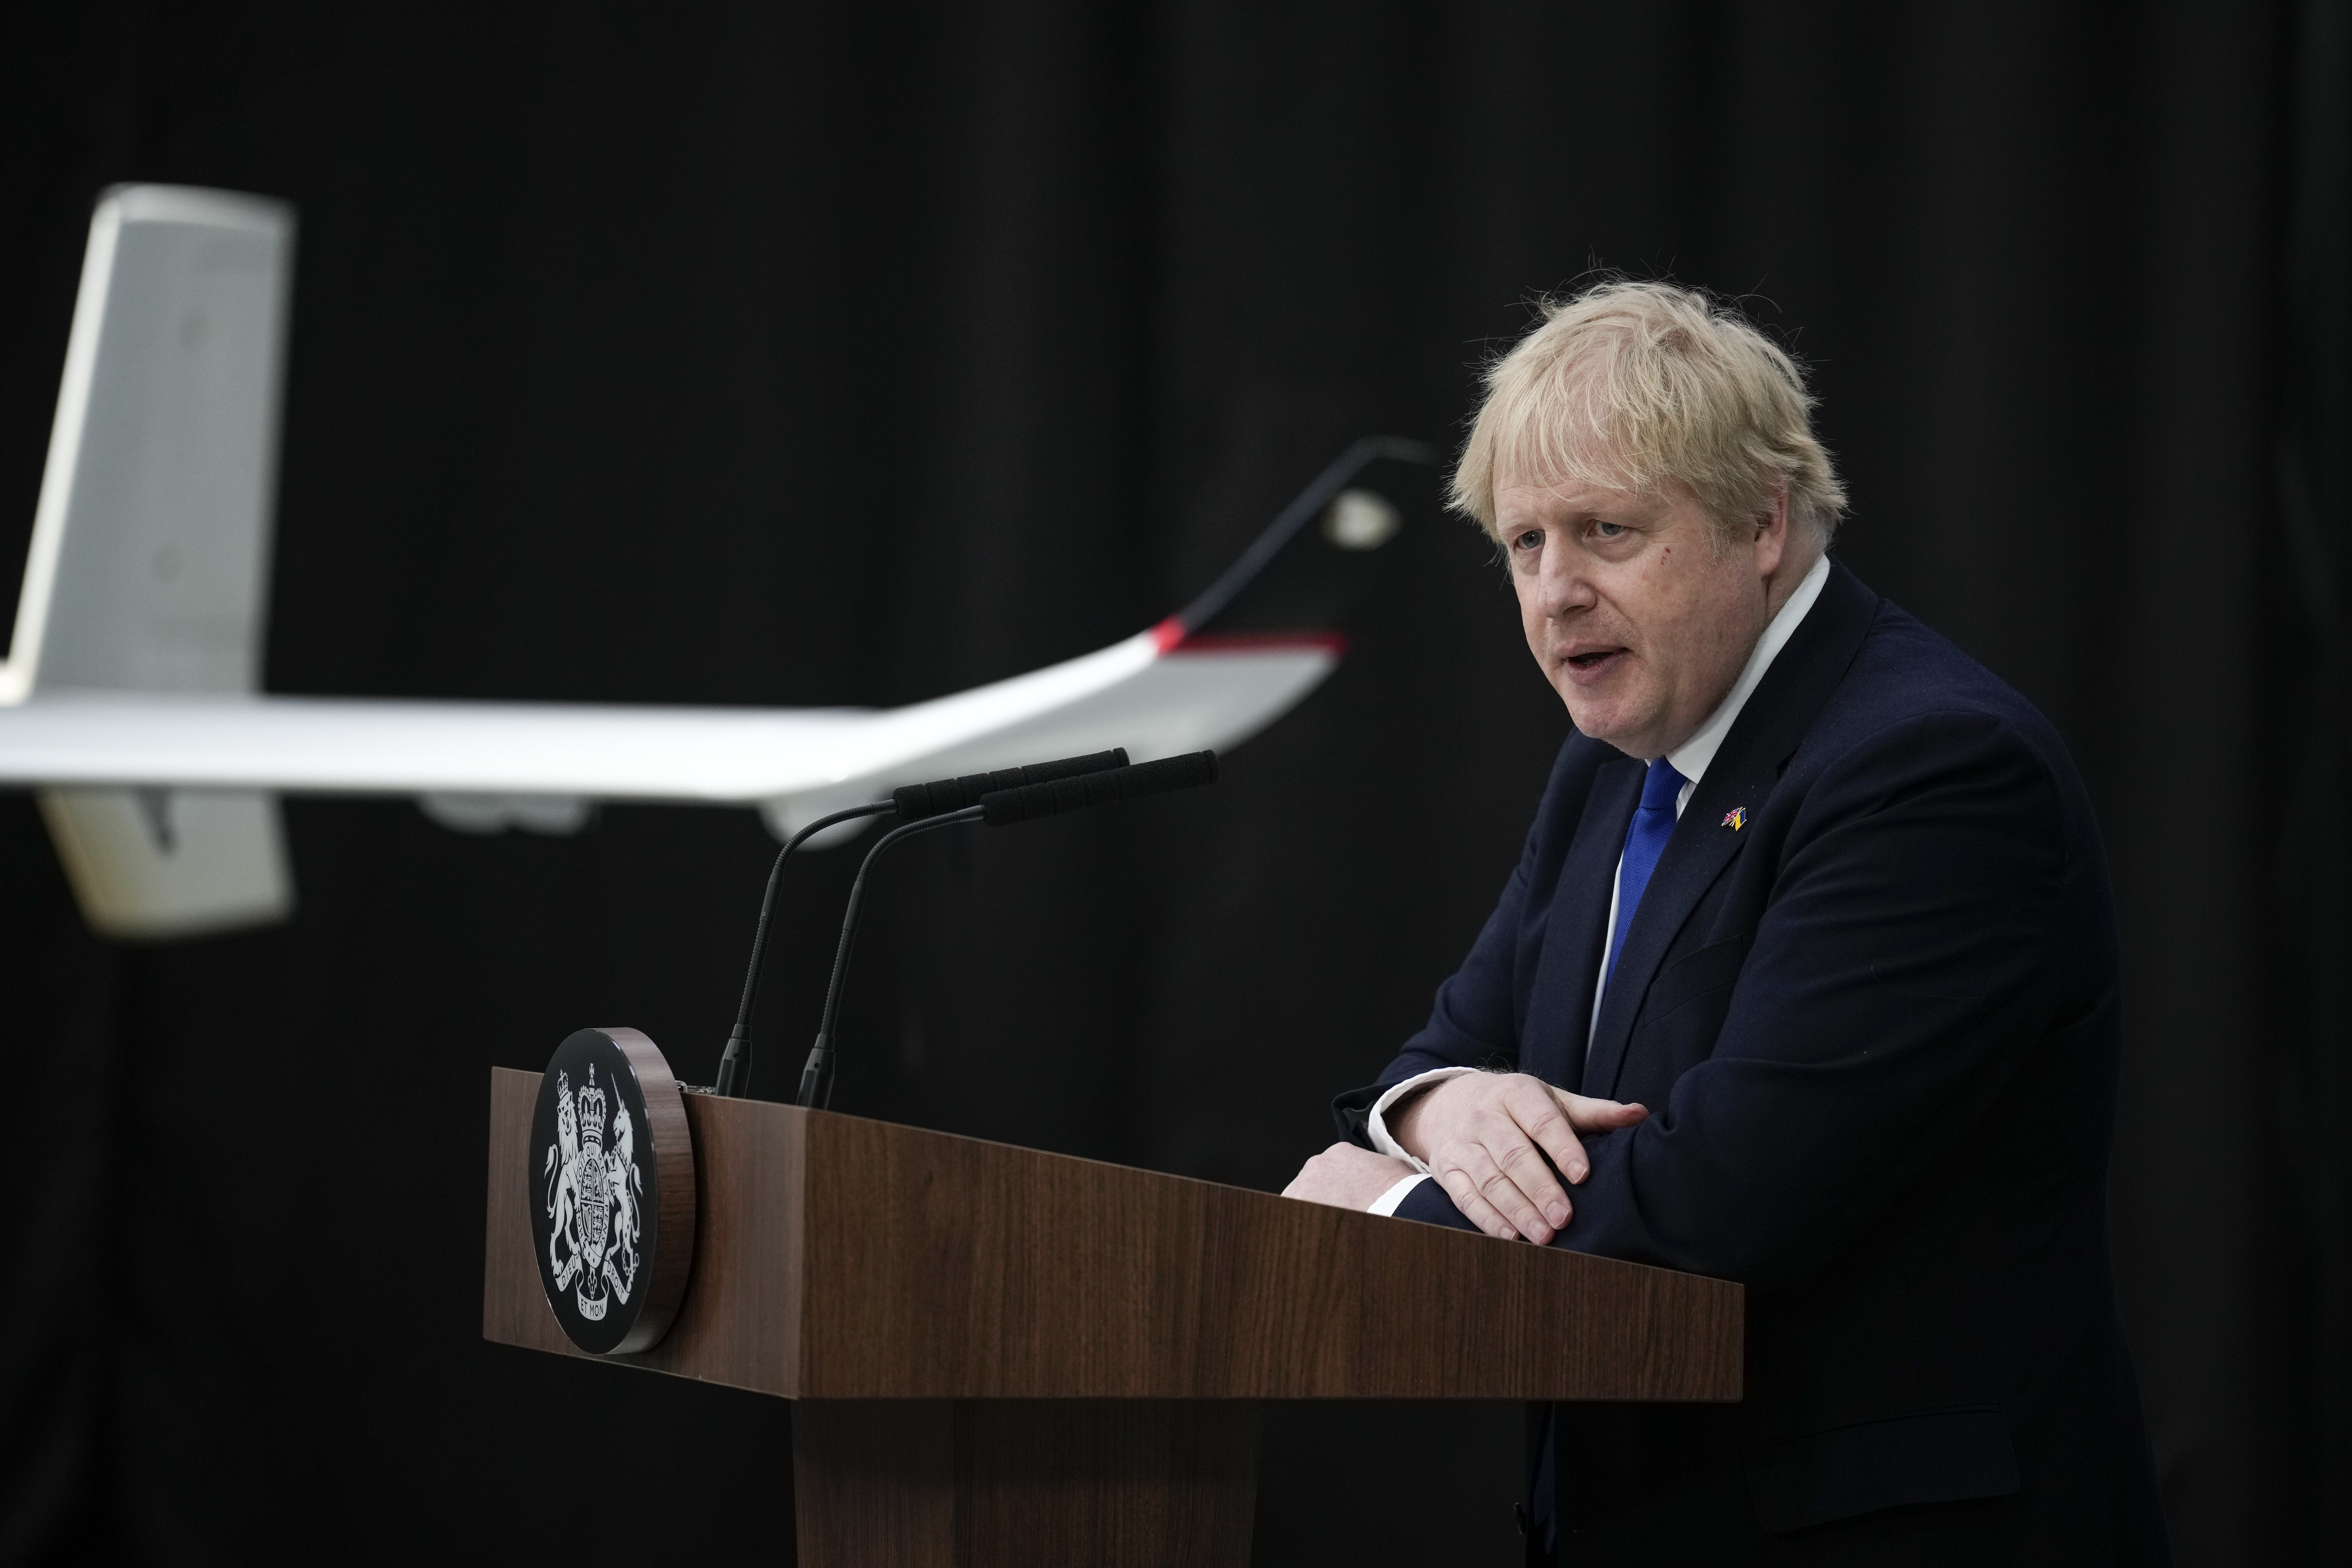 Boris Johnson delivers a speech to members of the armed services and Maritime and Coastguard Agency at Lydd airport in Kent